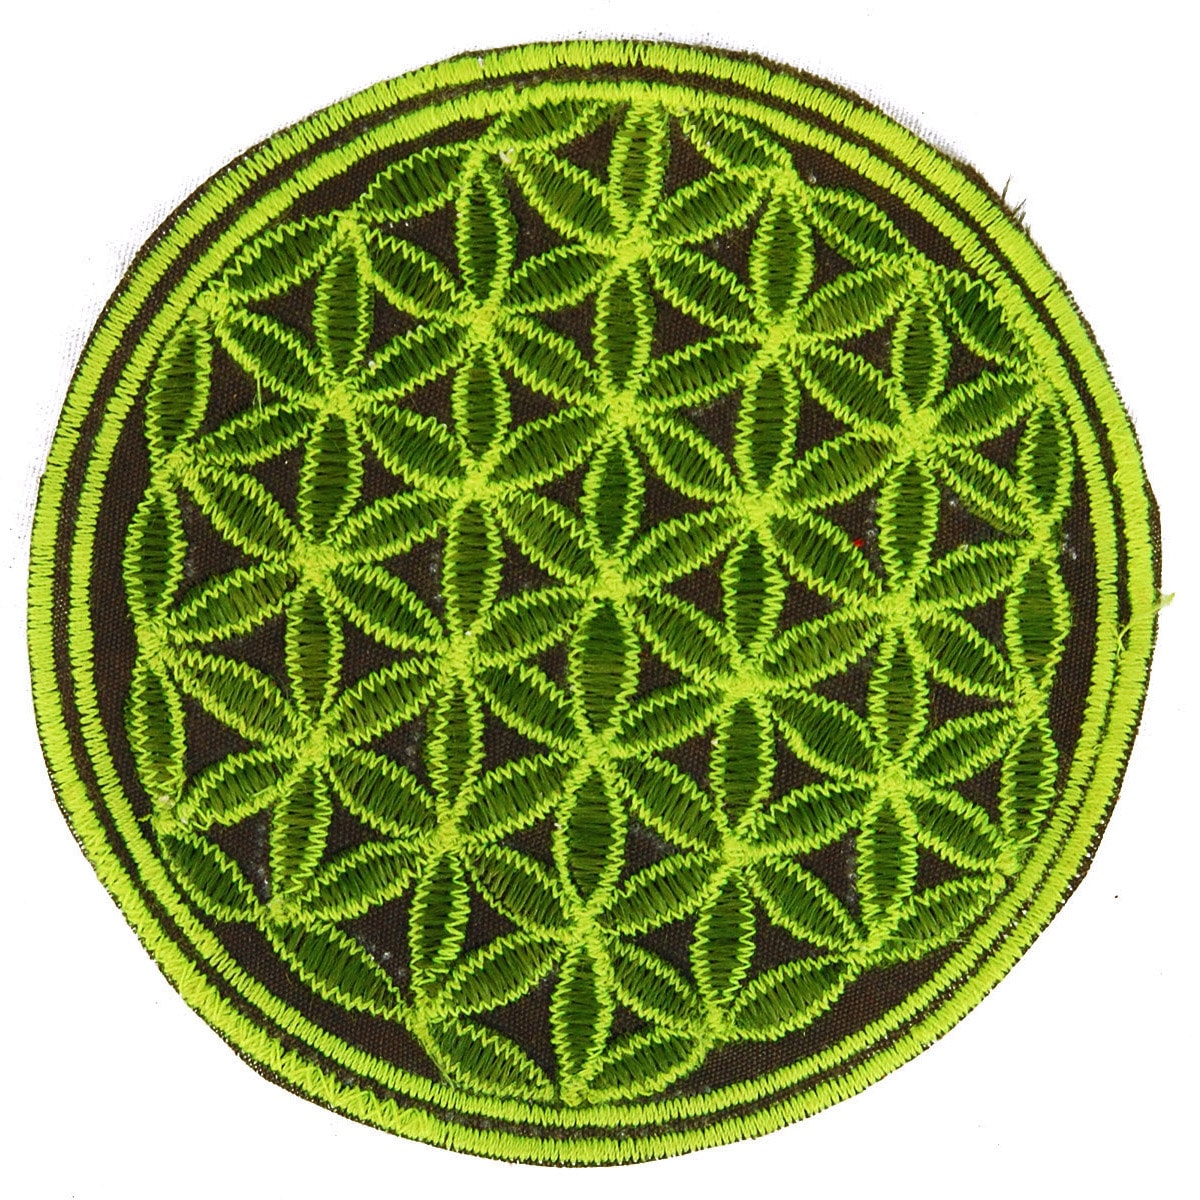 full blacklight flower of life patch small size embroidery artwork sacred geometry for sew on